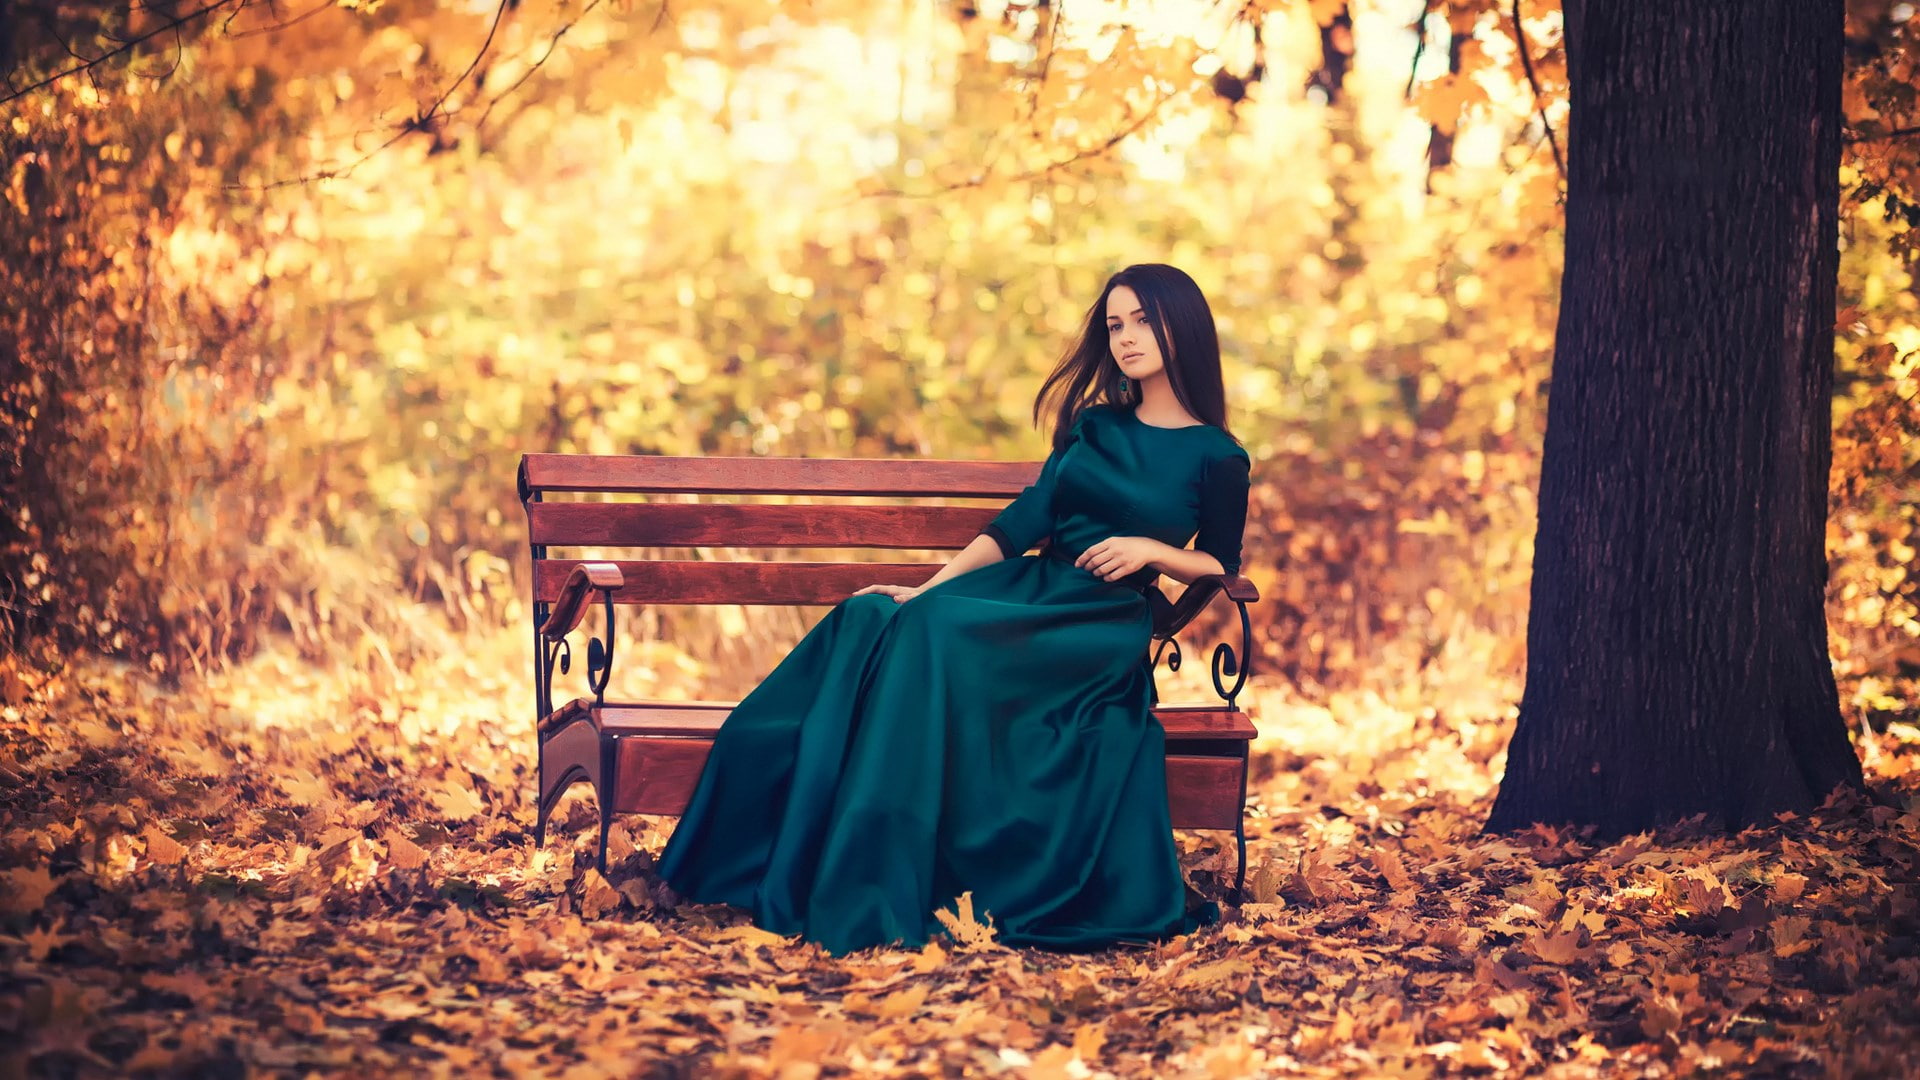 pc  girl 1920x1080, tree, one person, autumn, sitting, forest